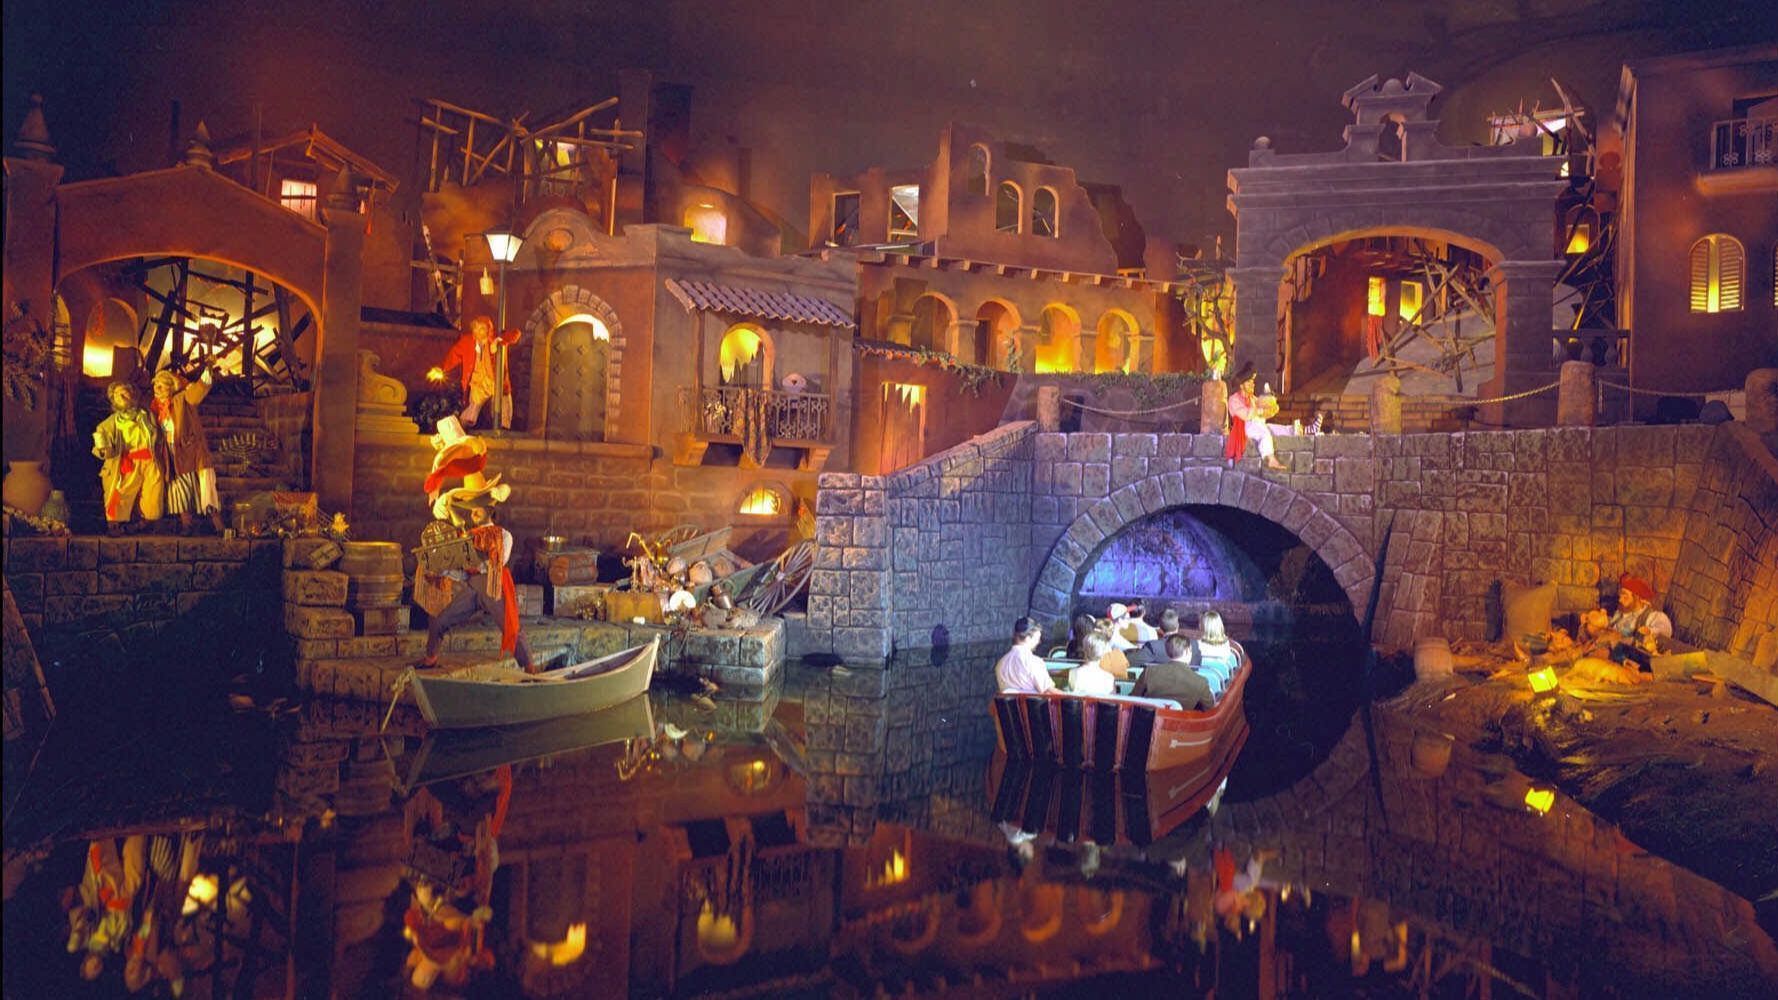 Pirates of the Caribbean anchors a Disneyland on the brink of great